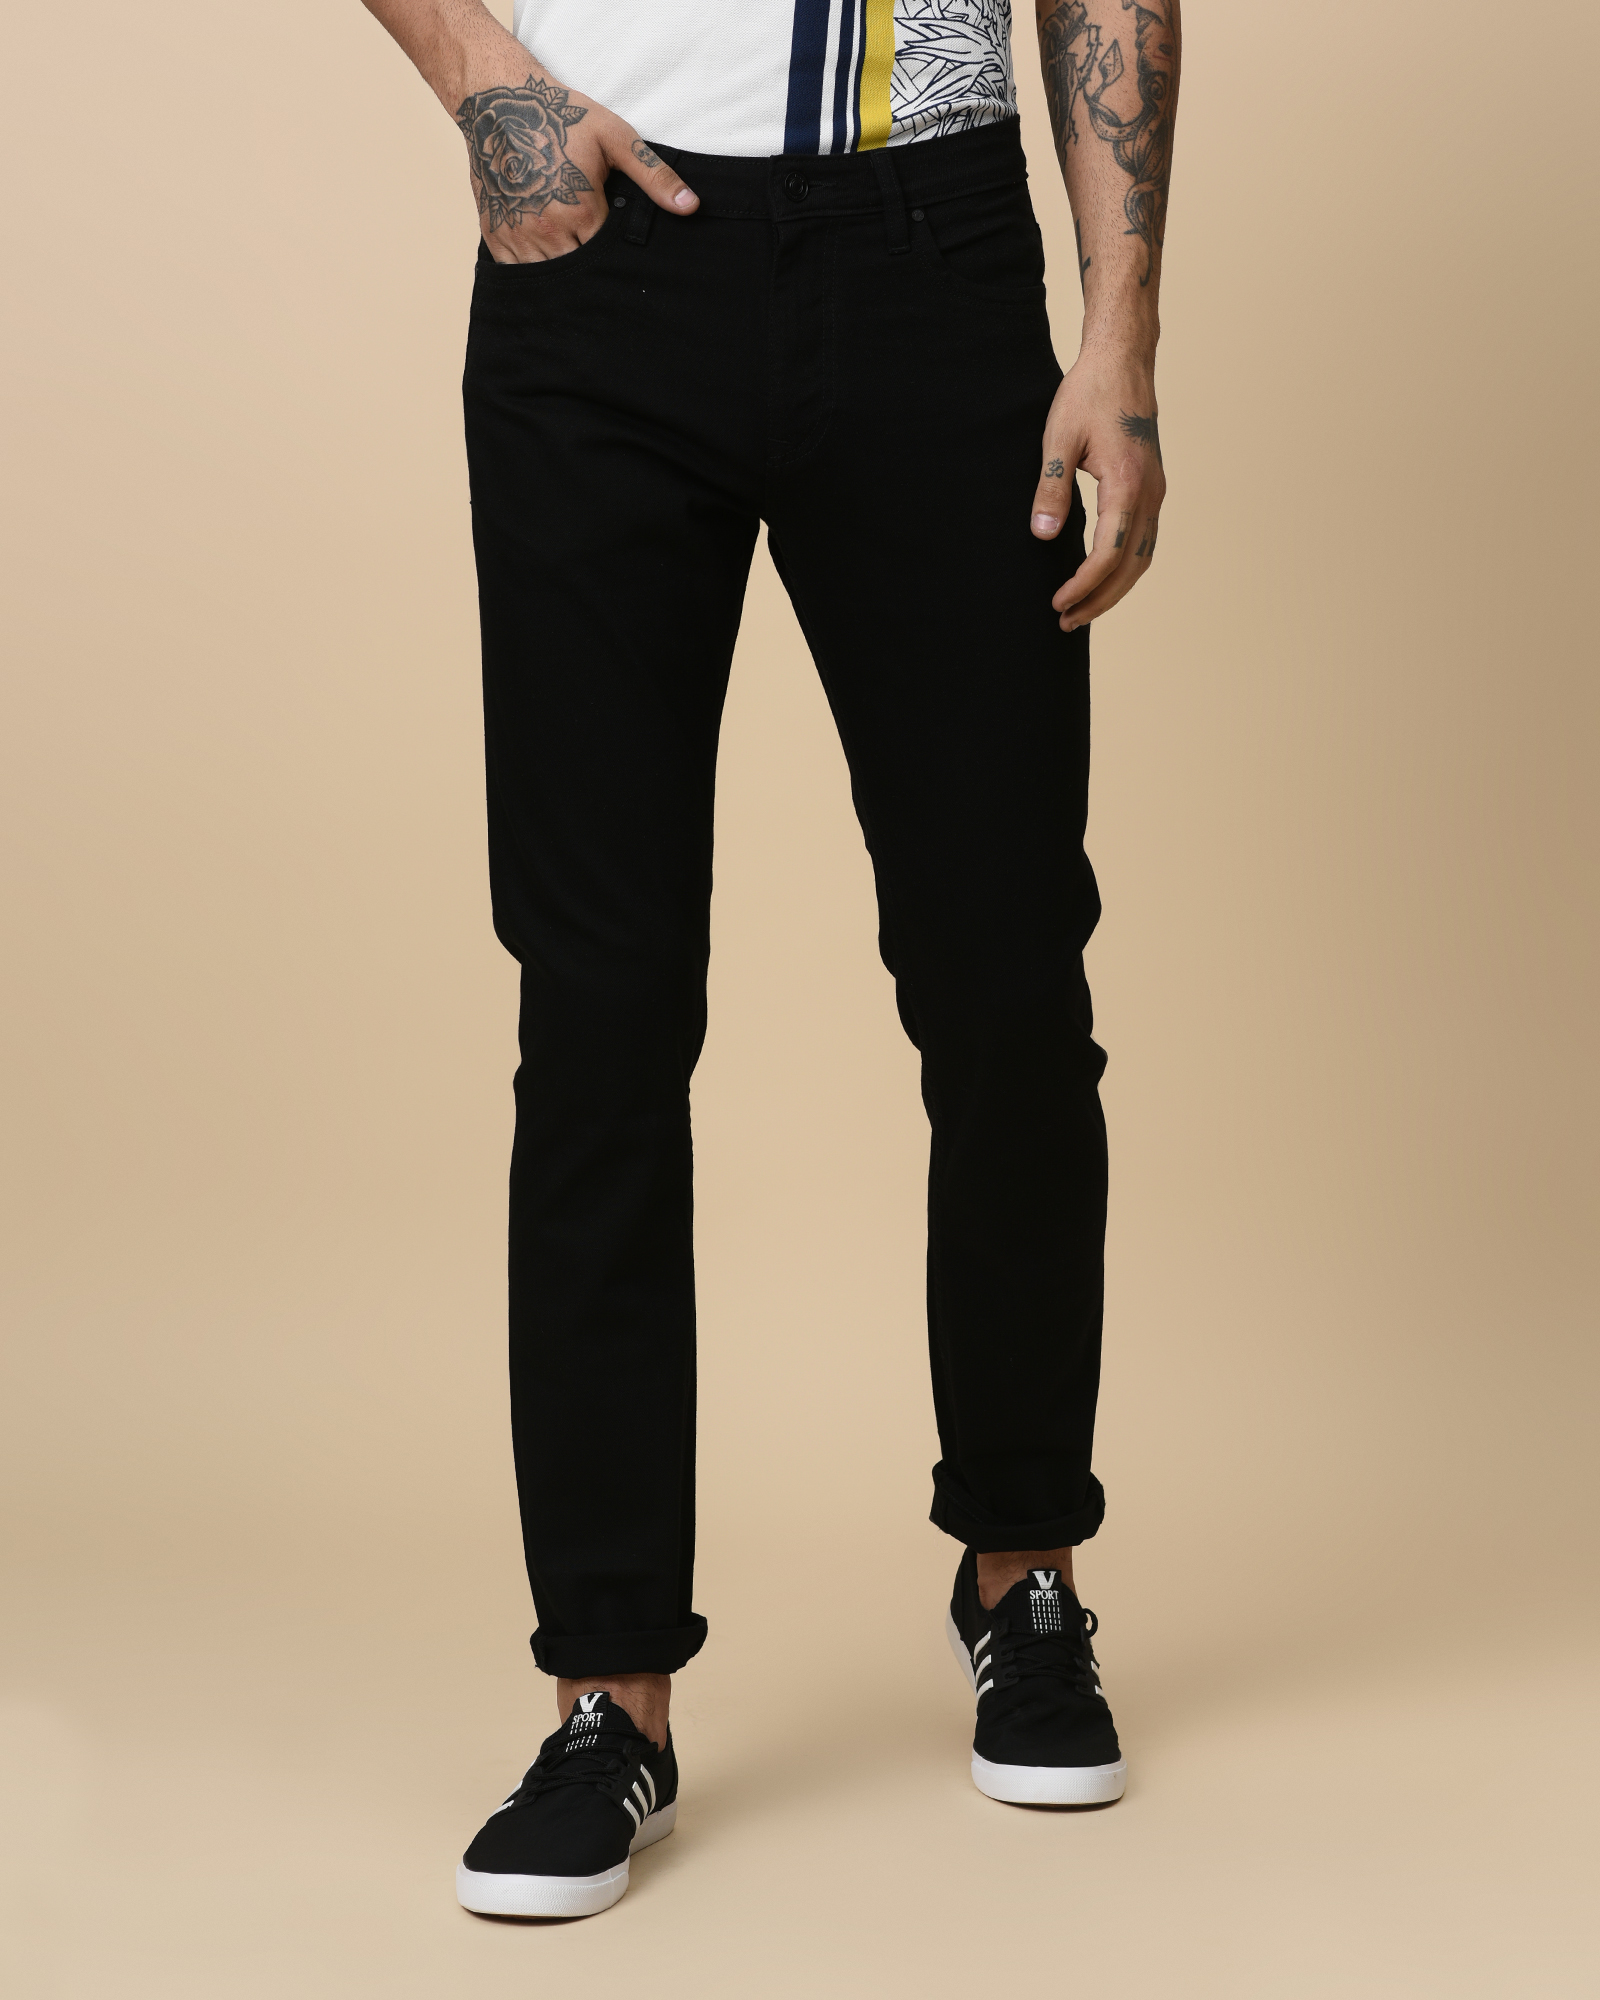 Jet Black Relaxed Fit Jeans